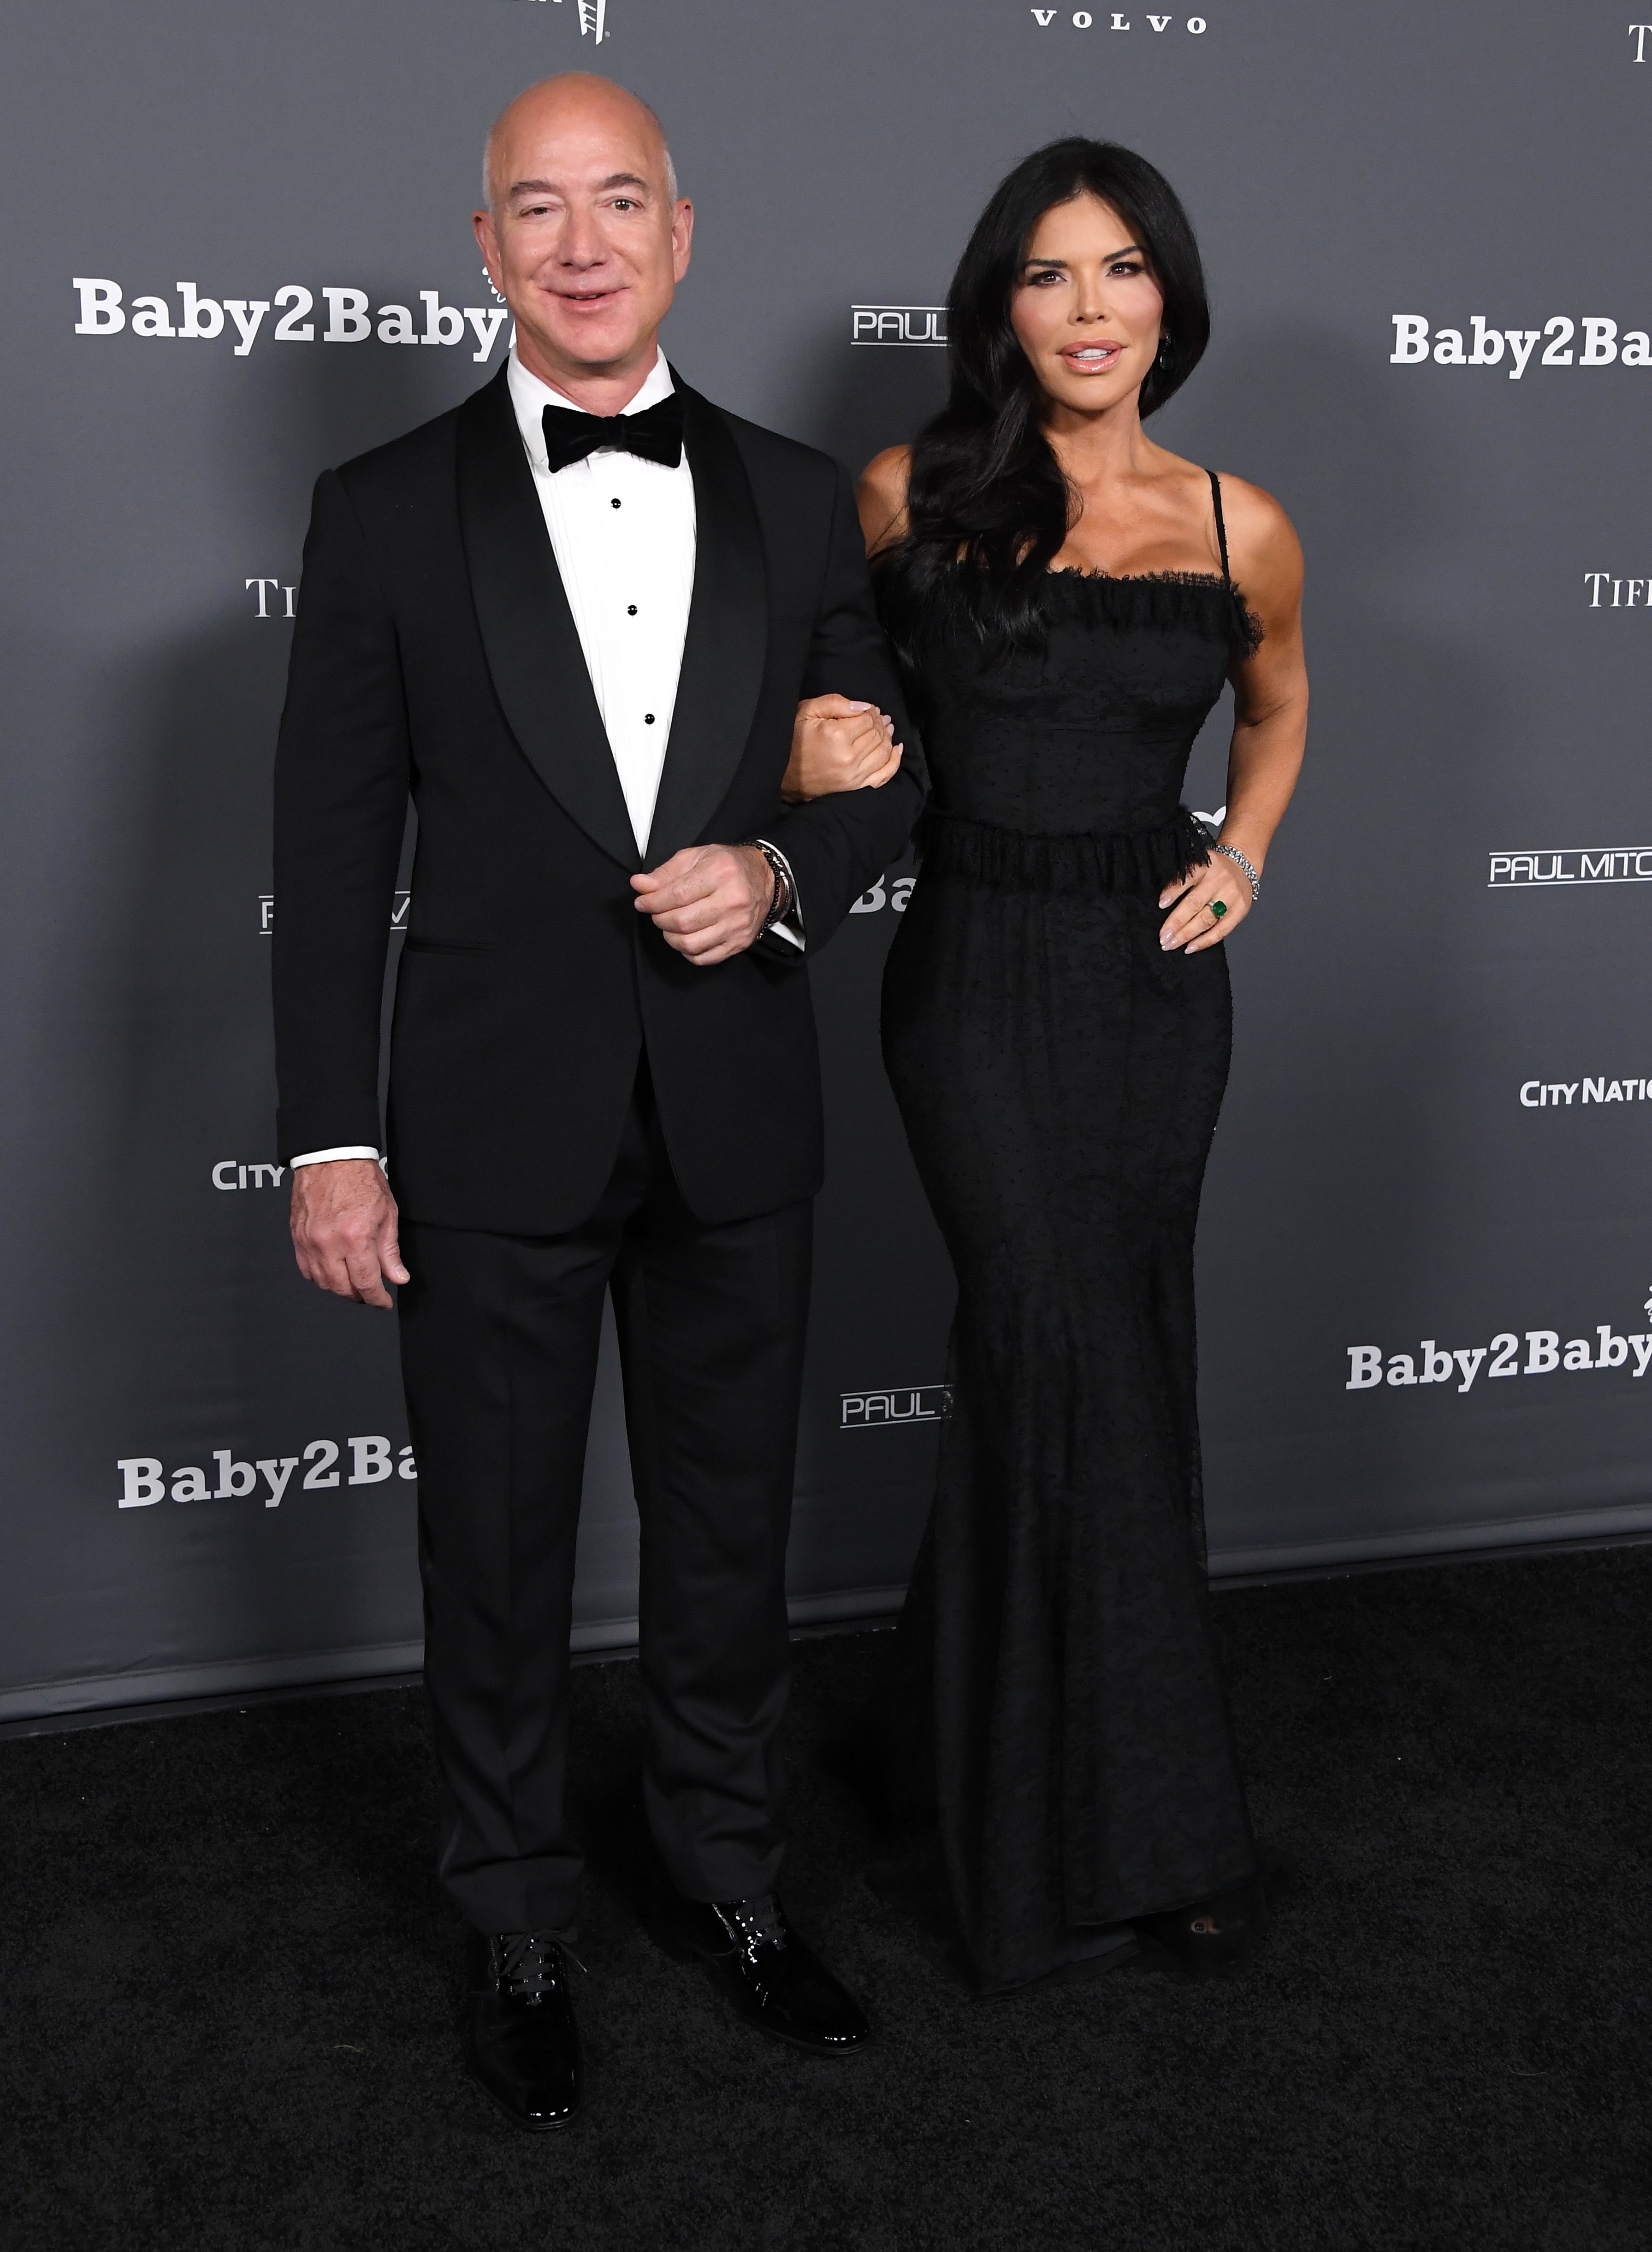 Jeff Bezos and Lauren Sanchez at a gala in California on November 13, 2021 | Source: Getty Images 